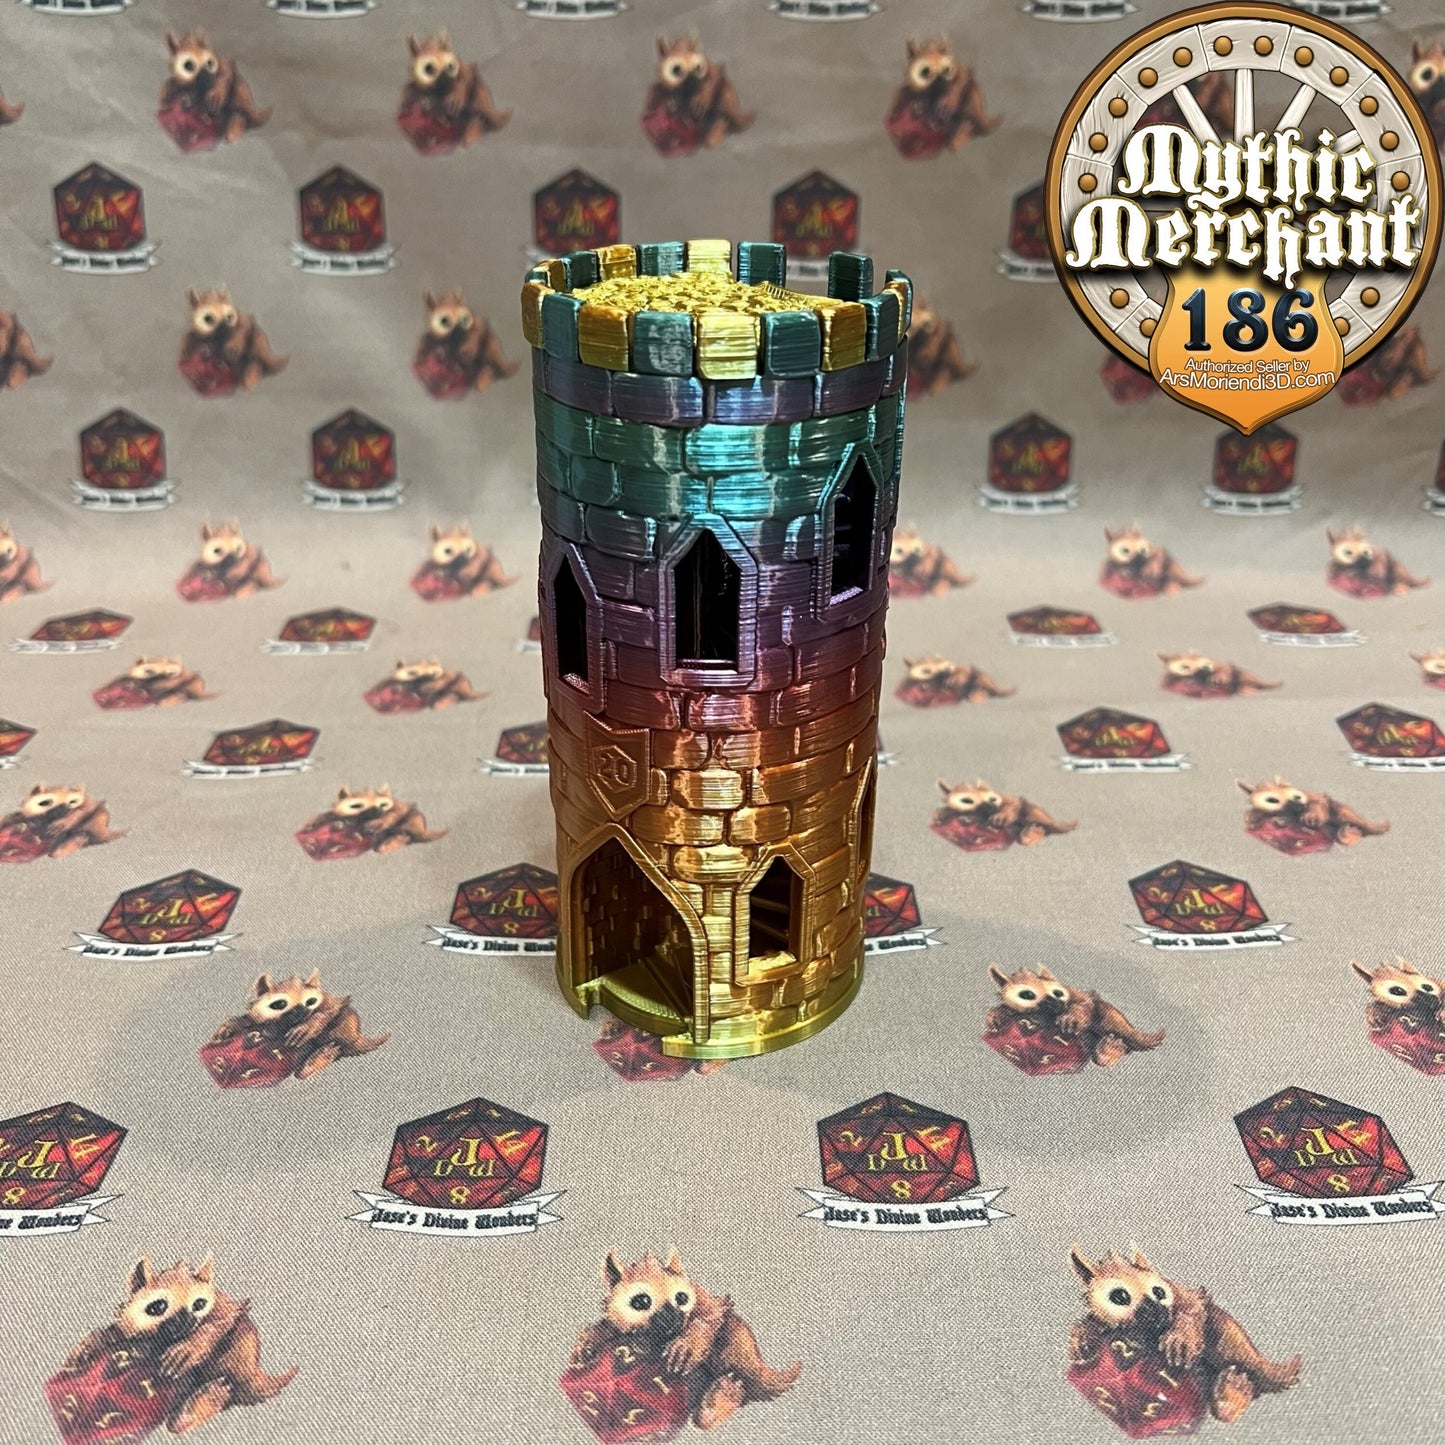 Mythic Mug Dice Tower from Ars Moriendi 3D - Dungeons and Dragons, Pathfinder, TTRPG, Dice Cup/Roller